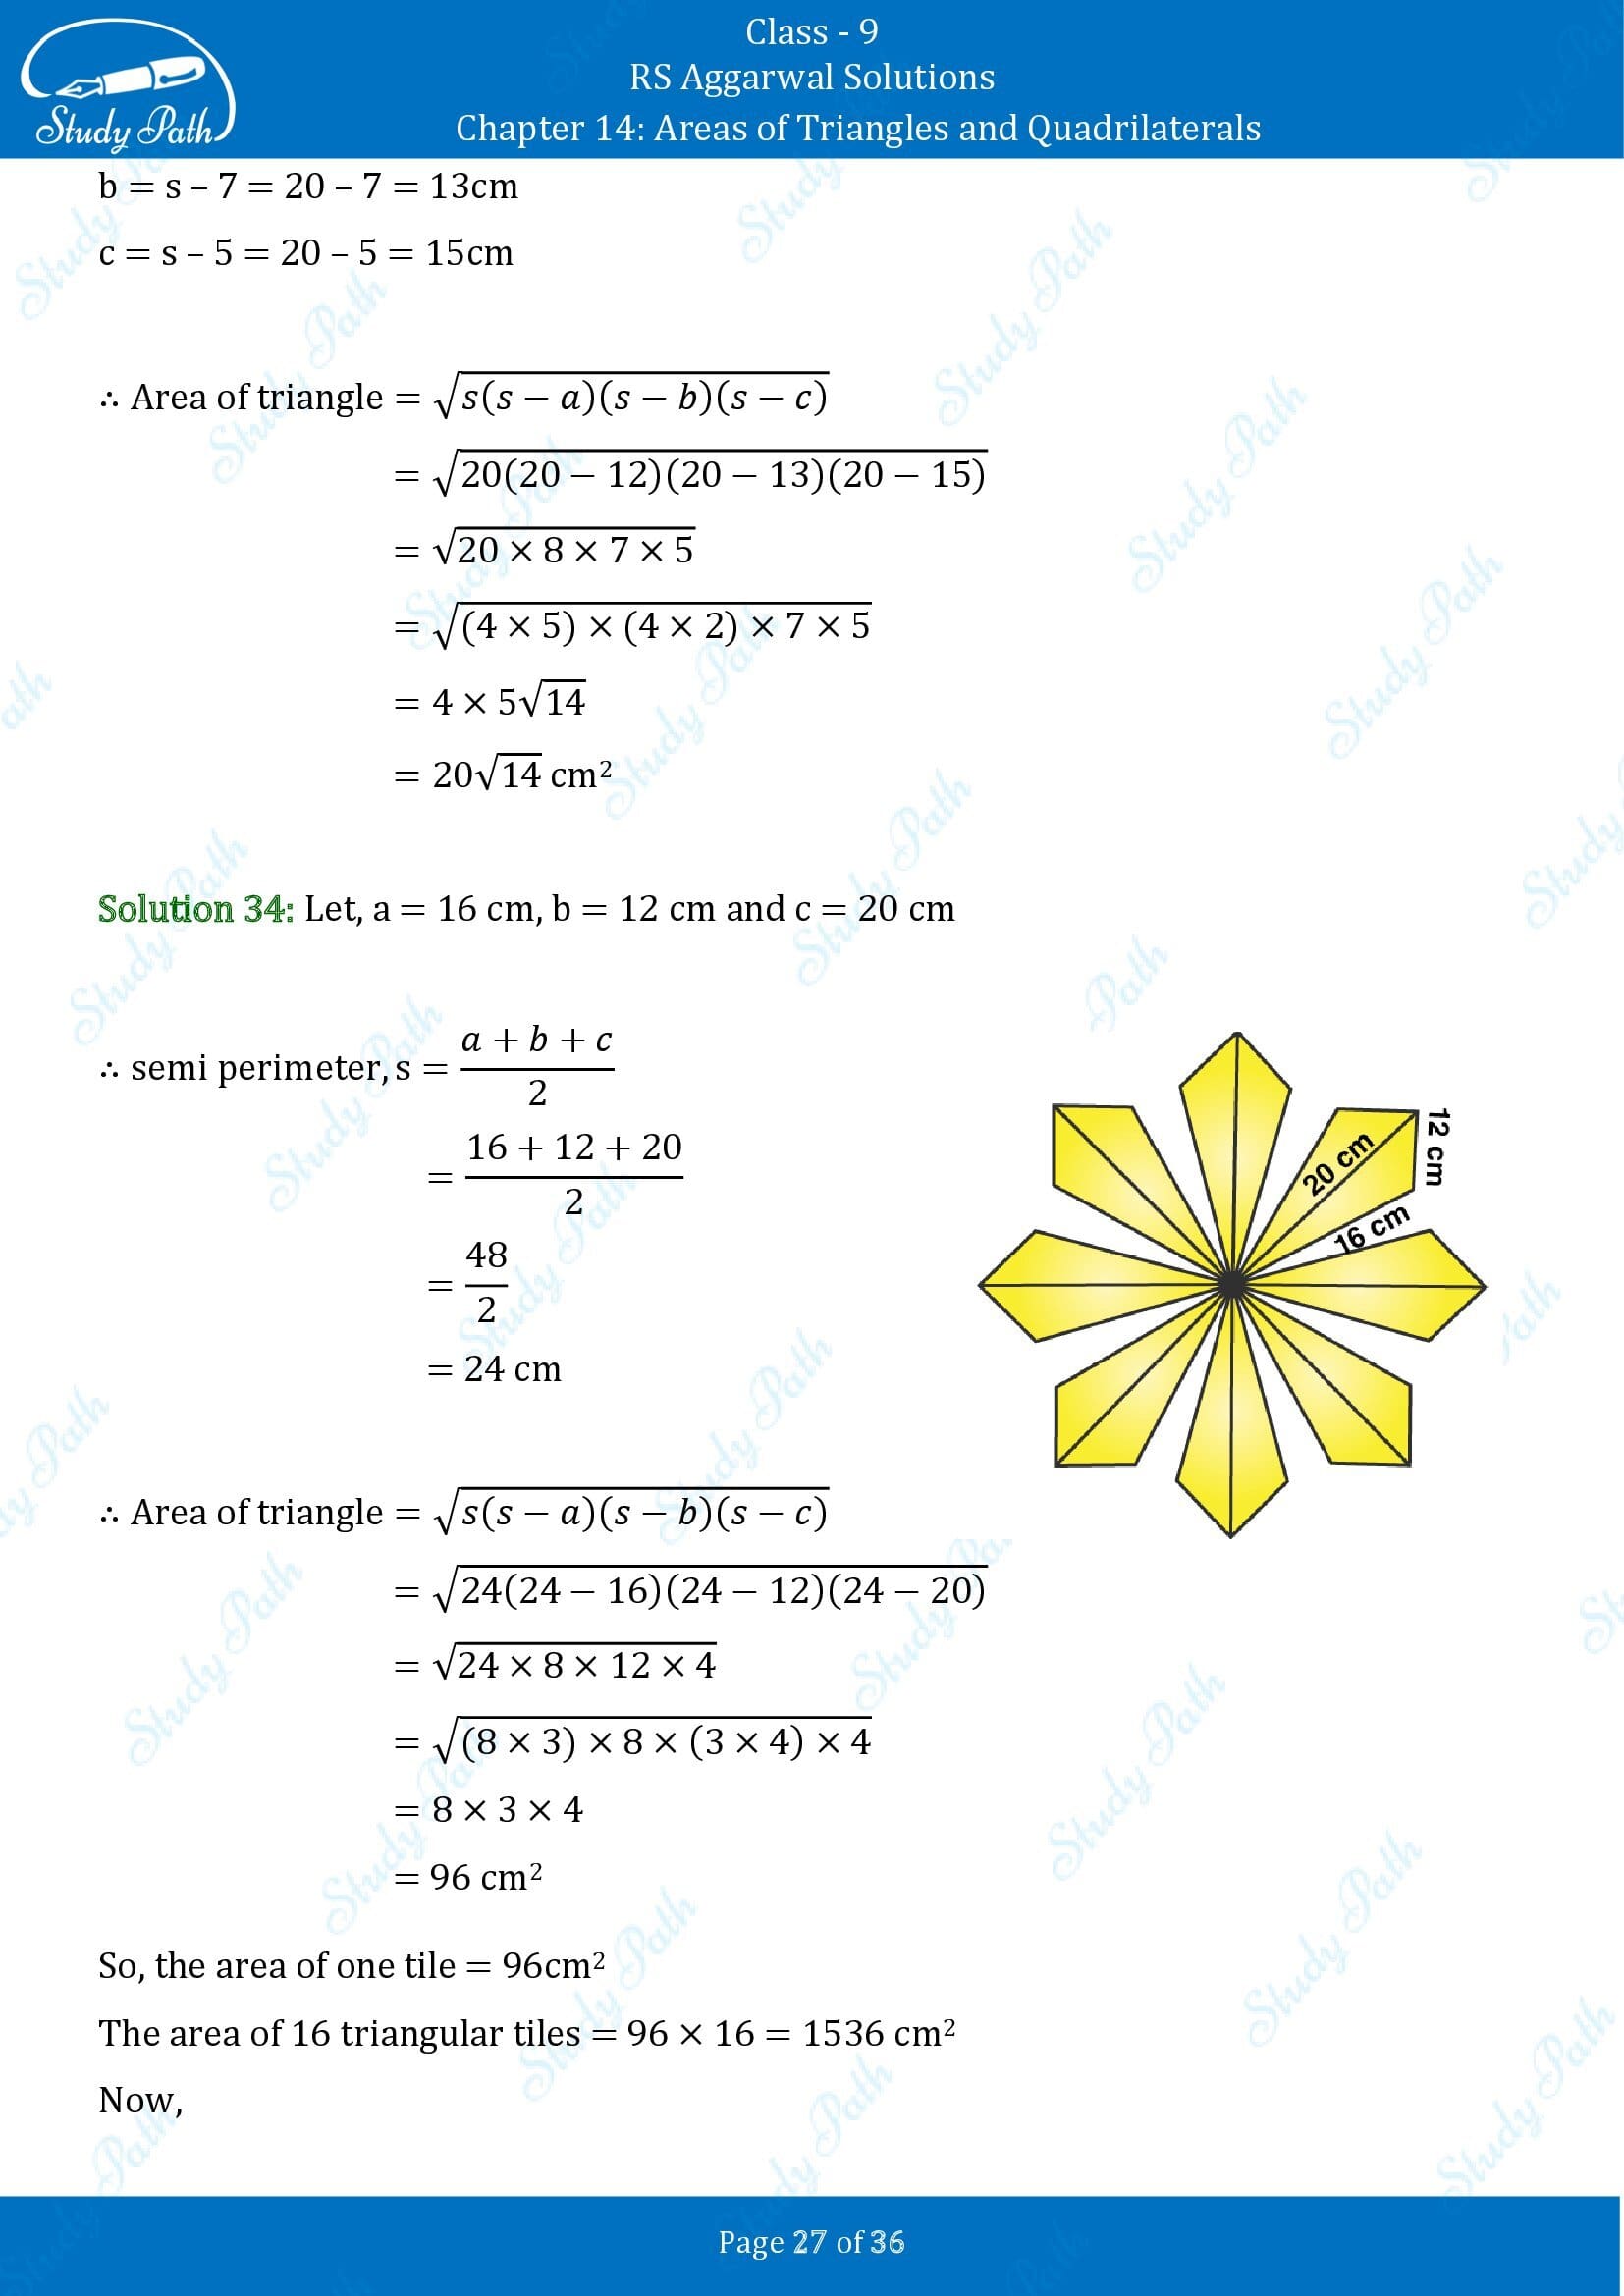 RS Aggarwal Solutions Class 9 Chapter 14 Areas of Triangles and Quadrilaterals Exercise 14 00027